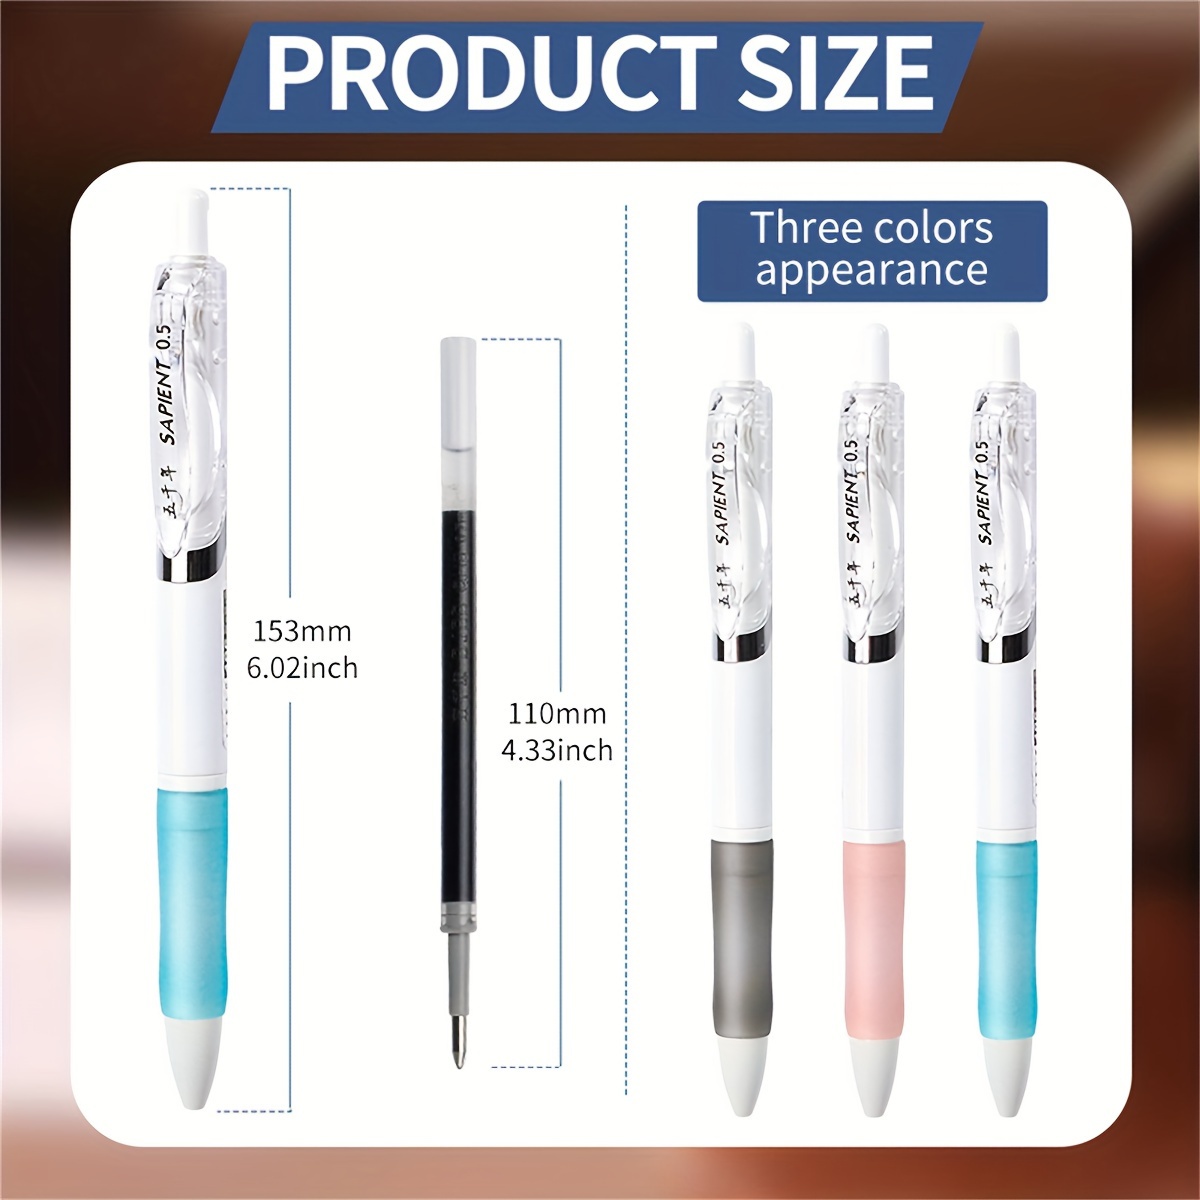 12pcs Retractable Gel Ink Pen, Black Ink Smooth Writing Pen, Fine Point  0.5mm (Super Tiny Tip)